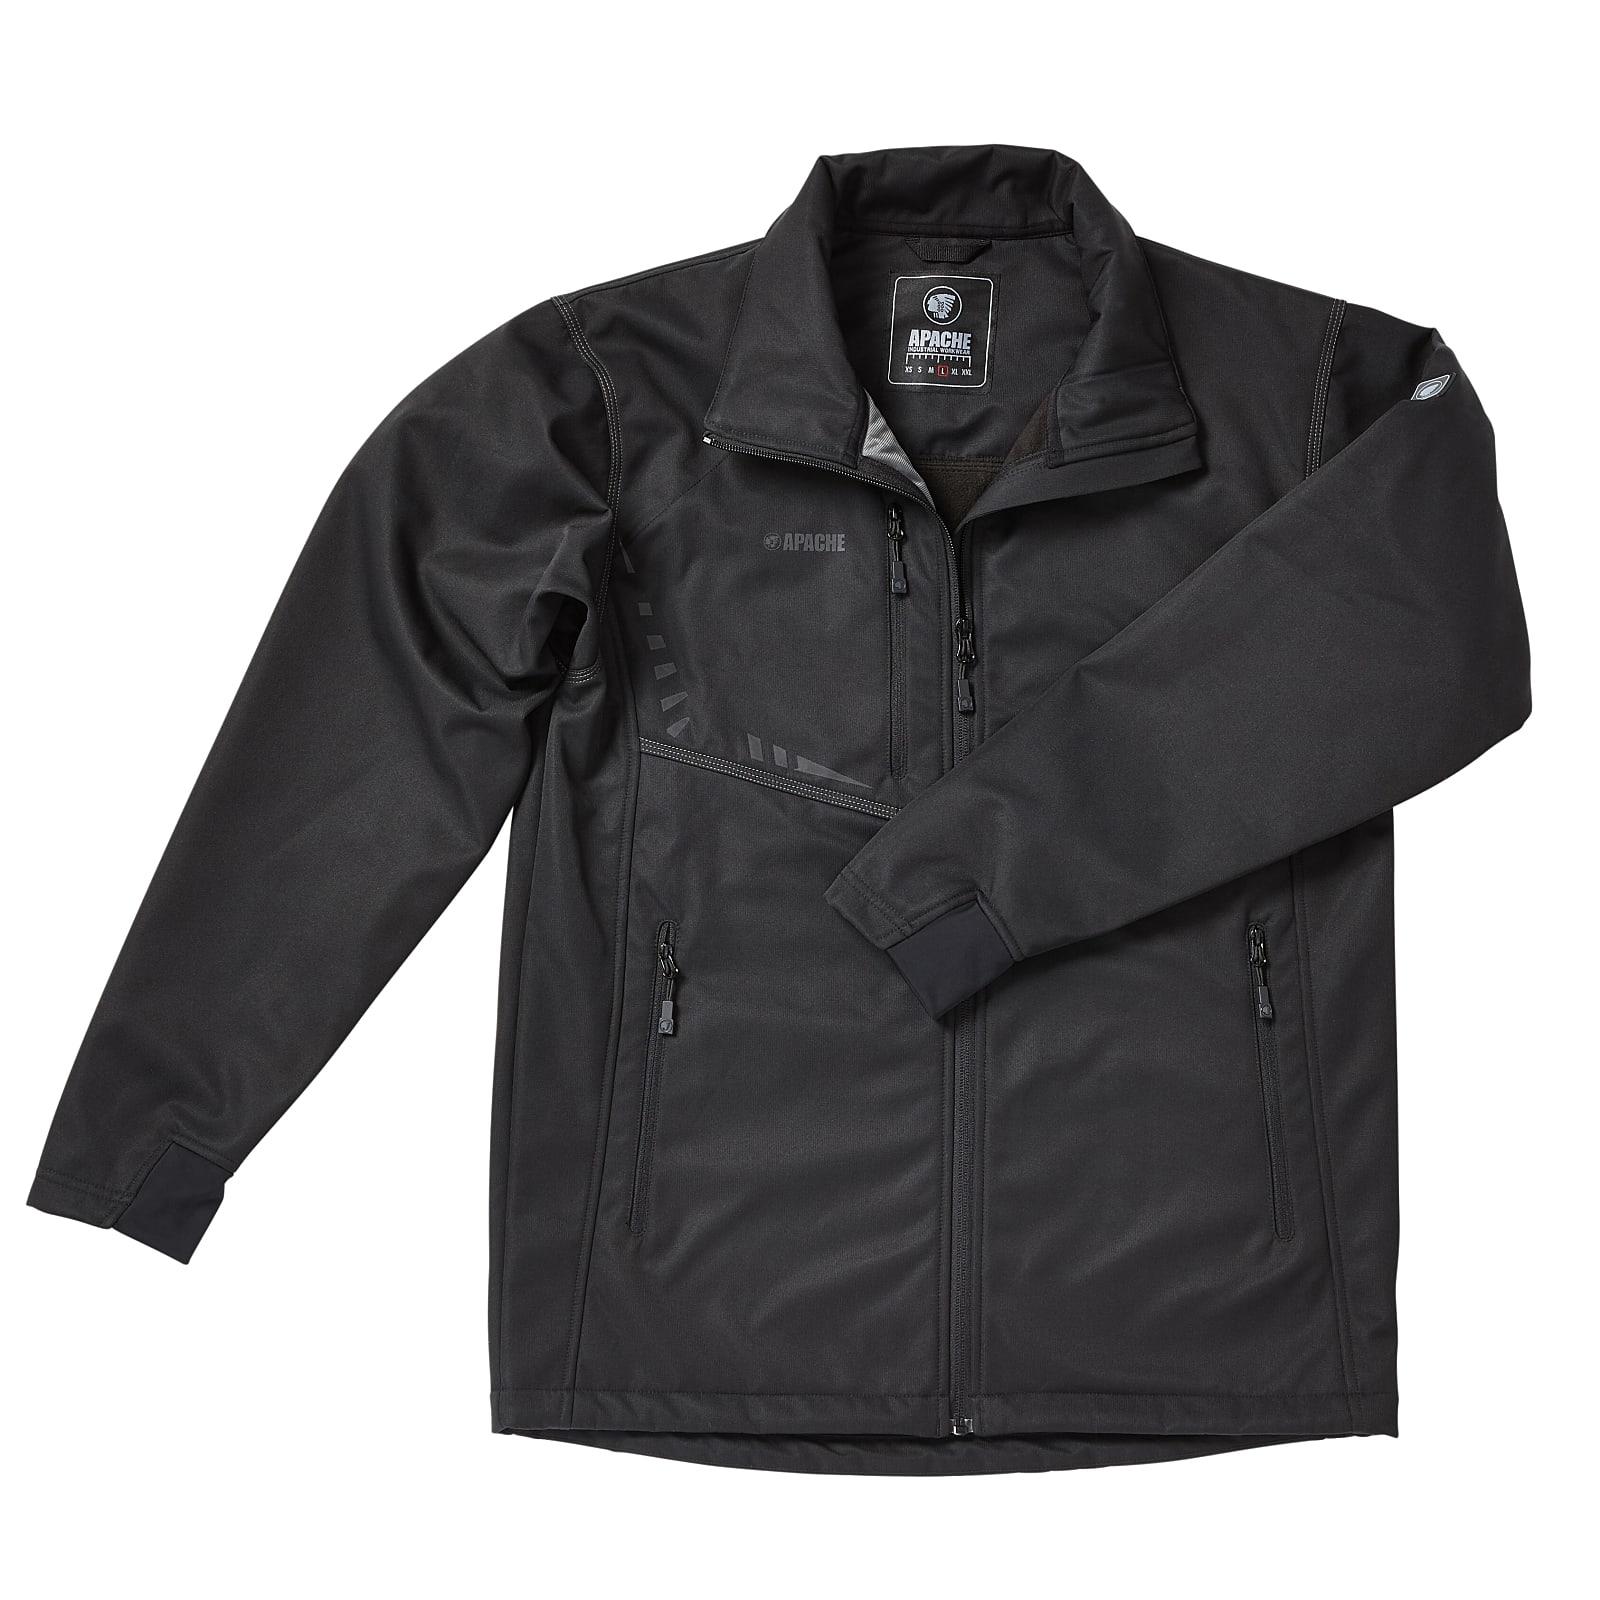 Apache ATS Soft Shell Jacket in Black (Product Code: ATS-SOFT-SHELL-JACKET)